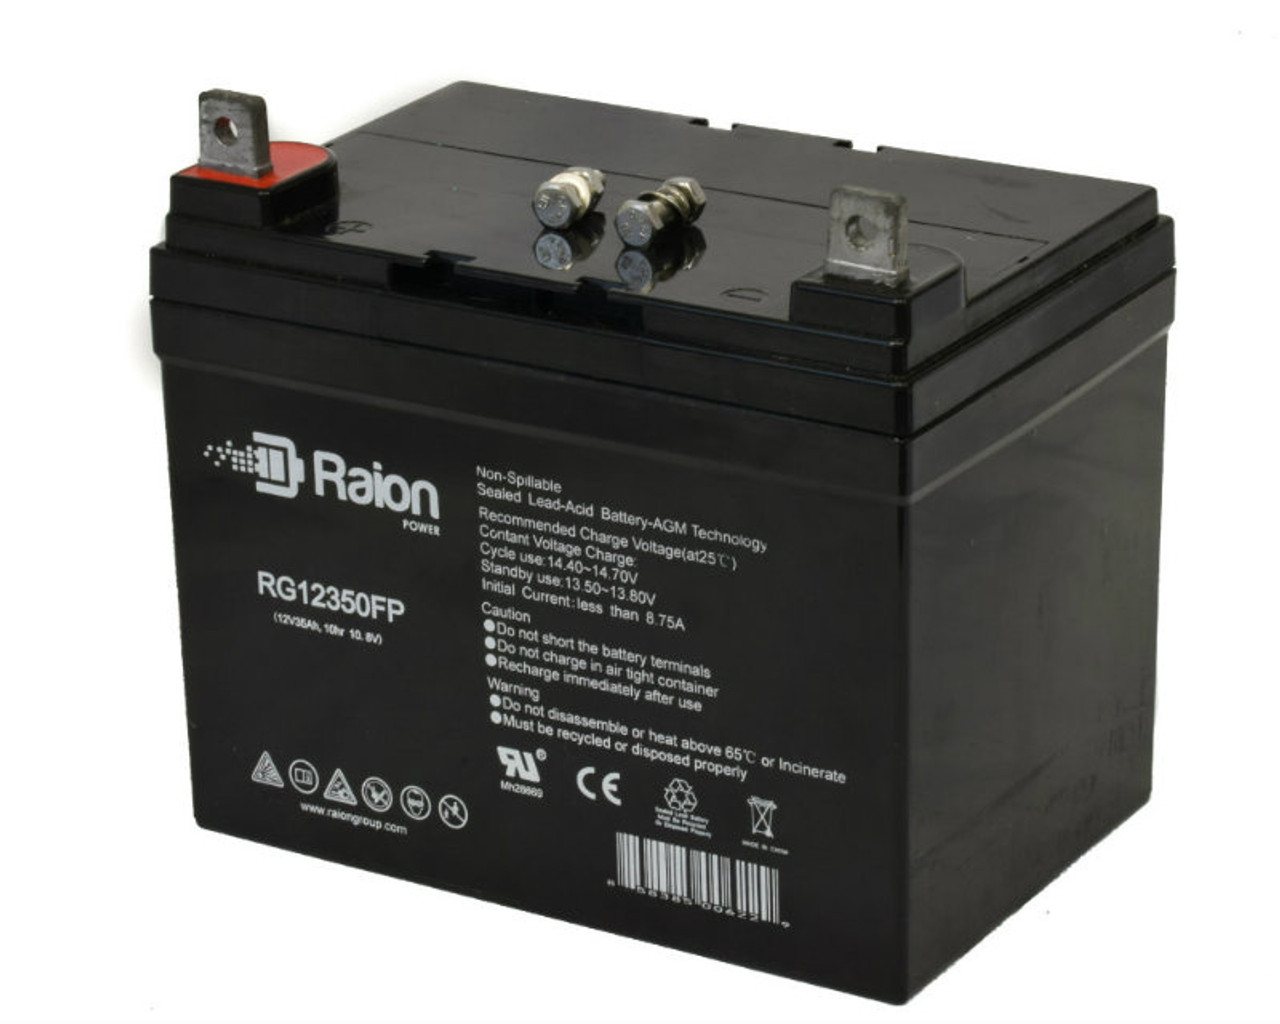 Raion Power Replacement 12V 35Ah RG12350FP Battery for Dixon 5020